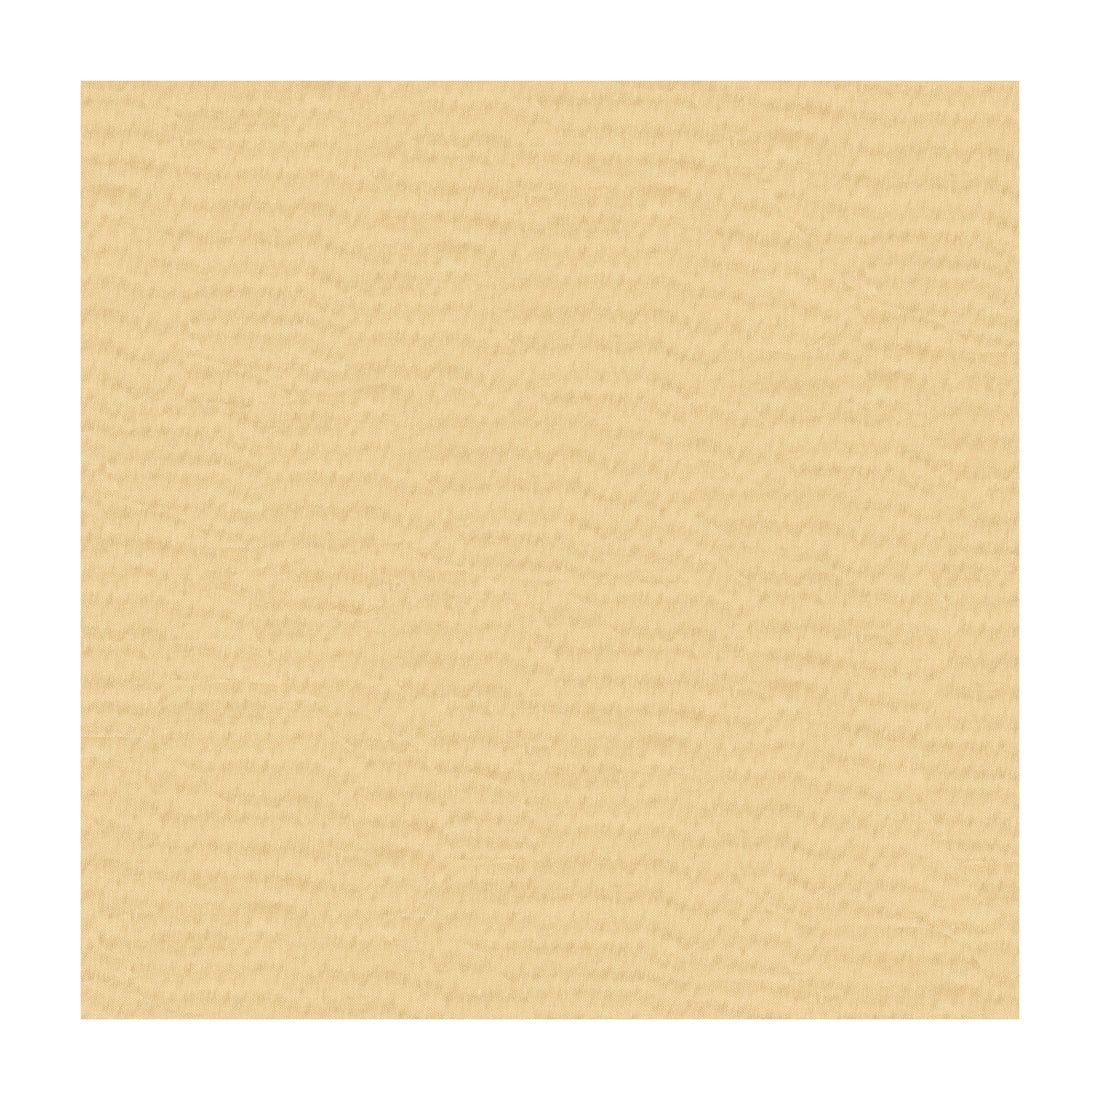 Kravet Contract fabric in 4150-16 color - pattern 4150.16.0 - by Kravet Contract